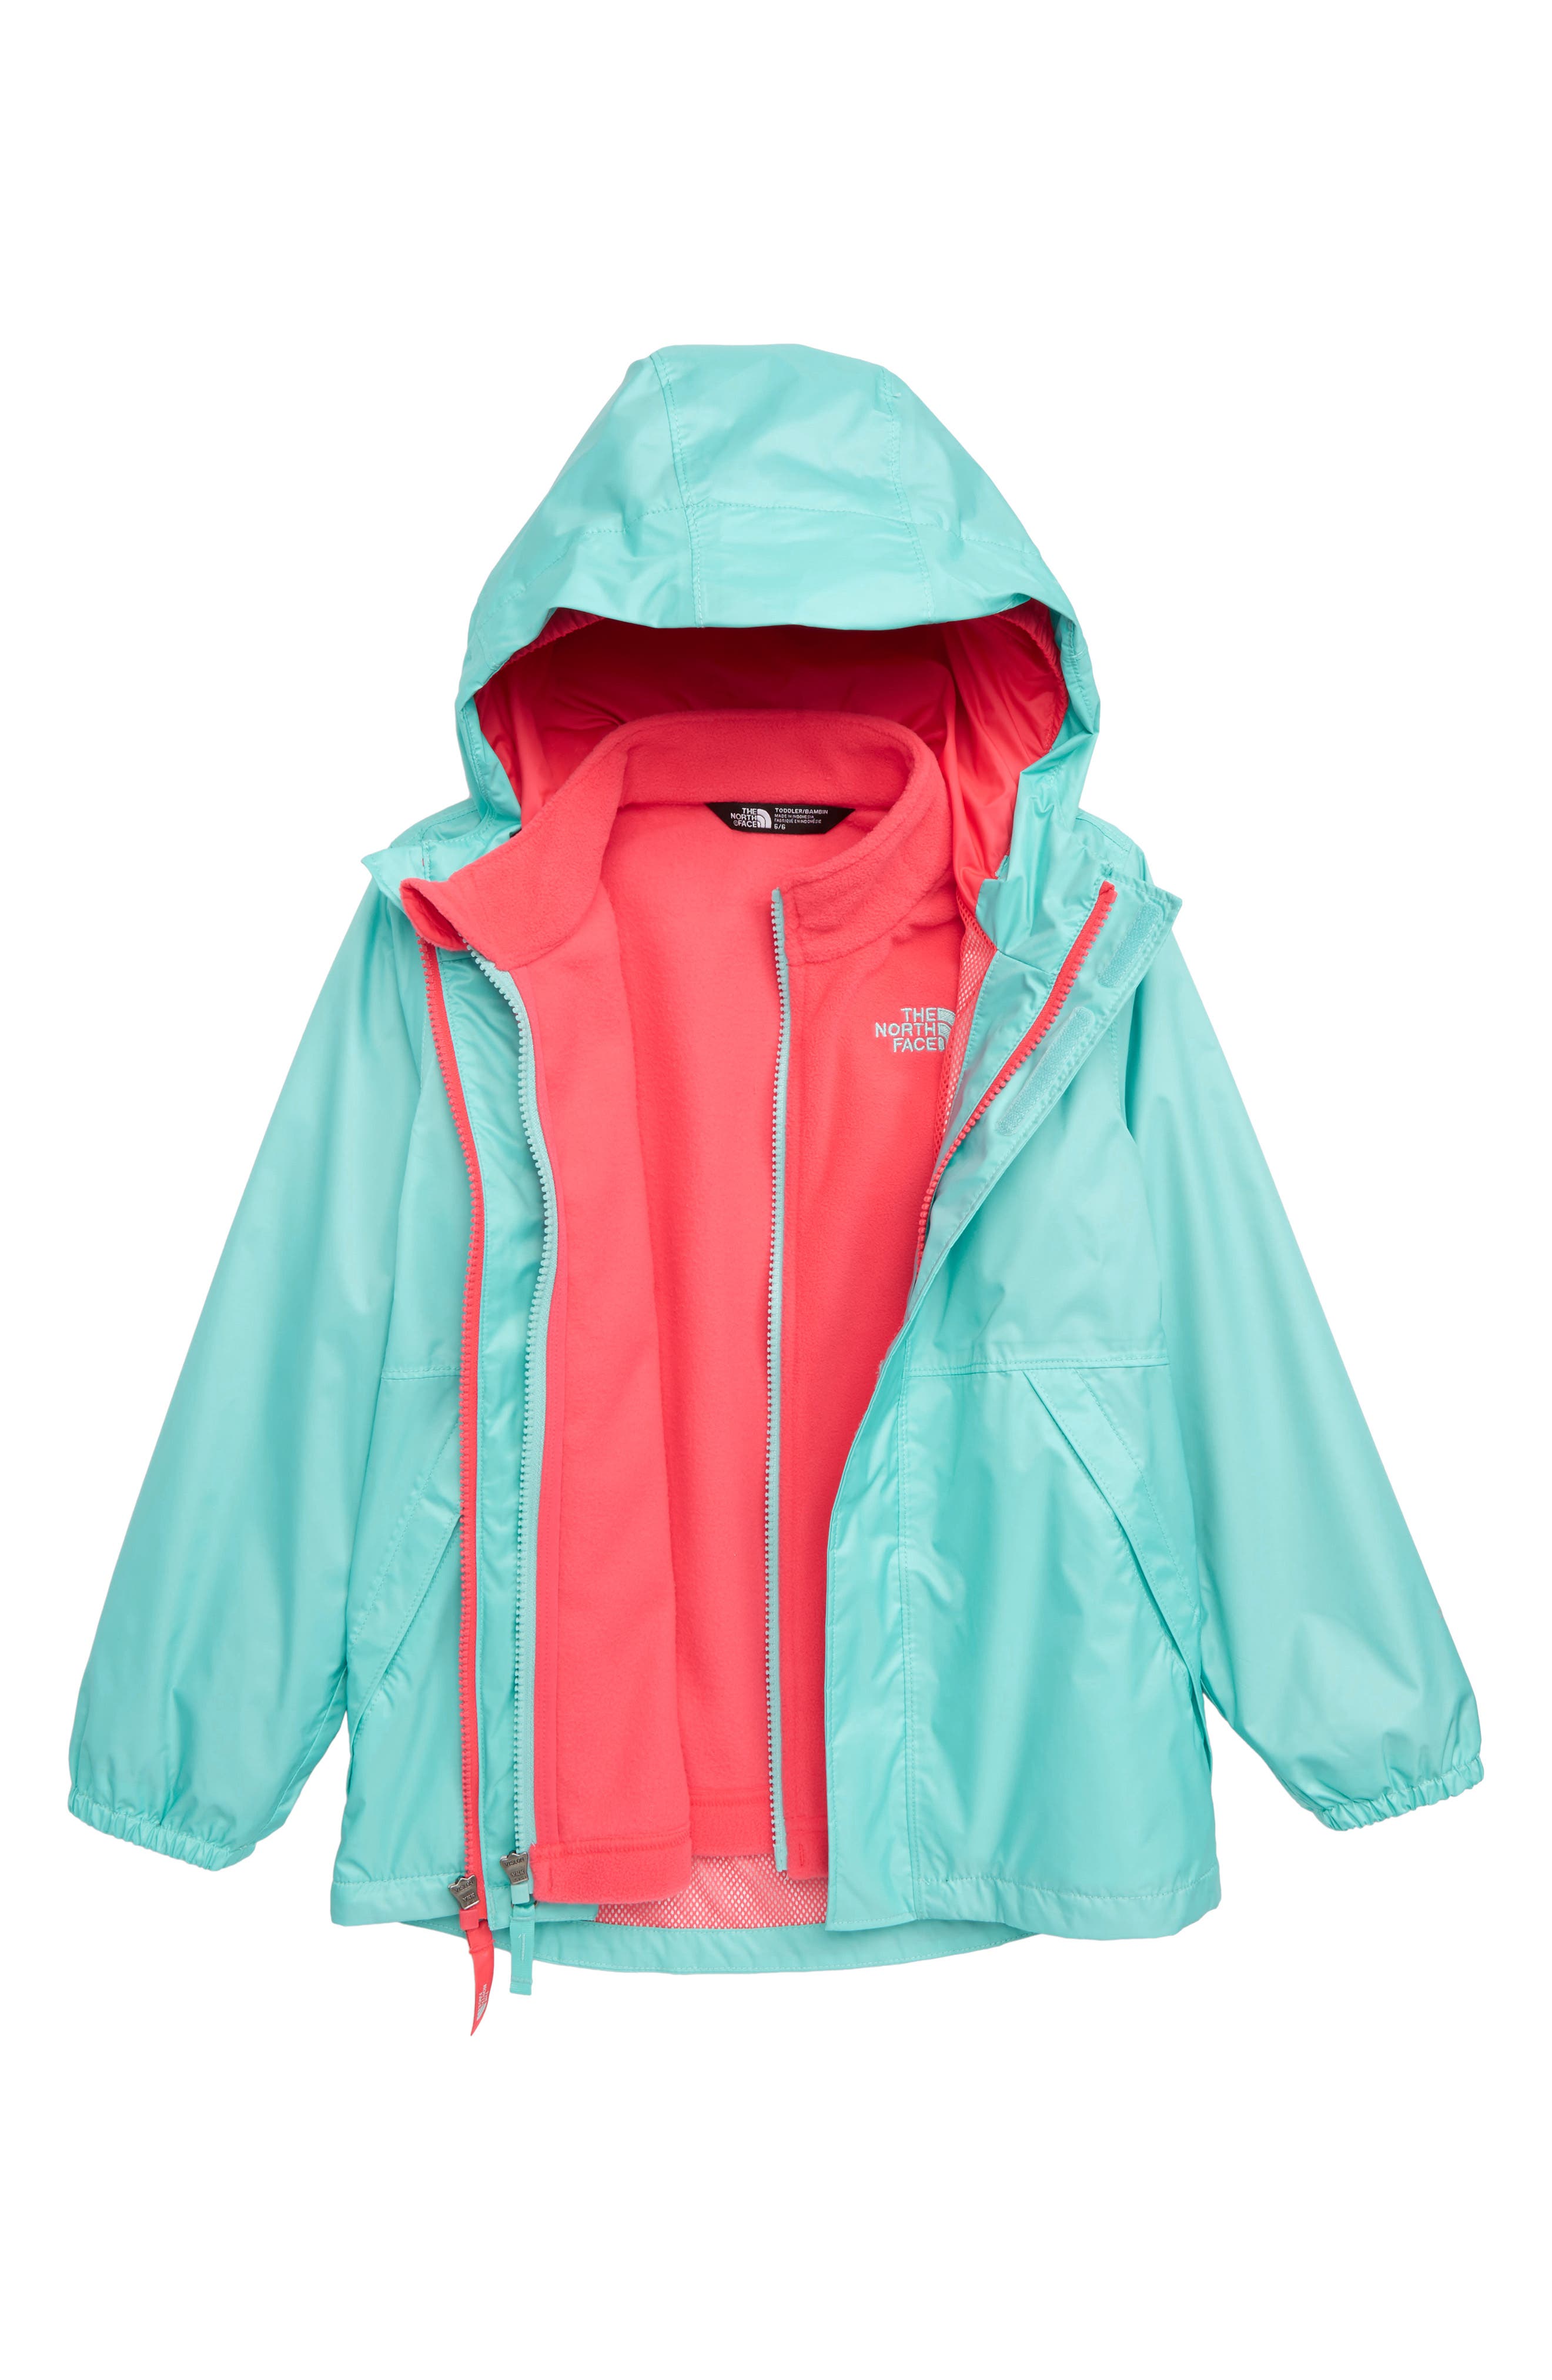 north face stormy rain triclimate